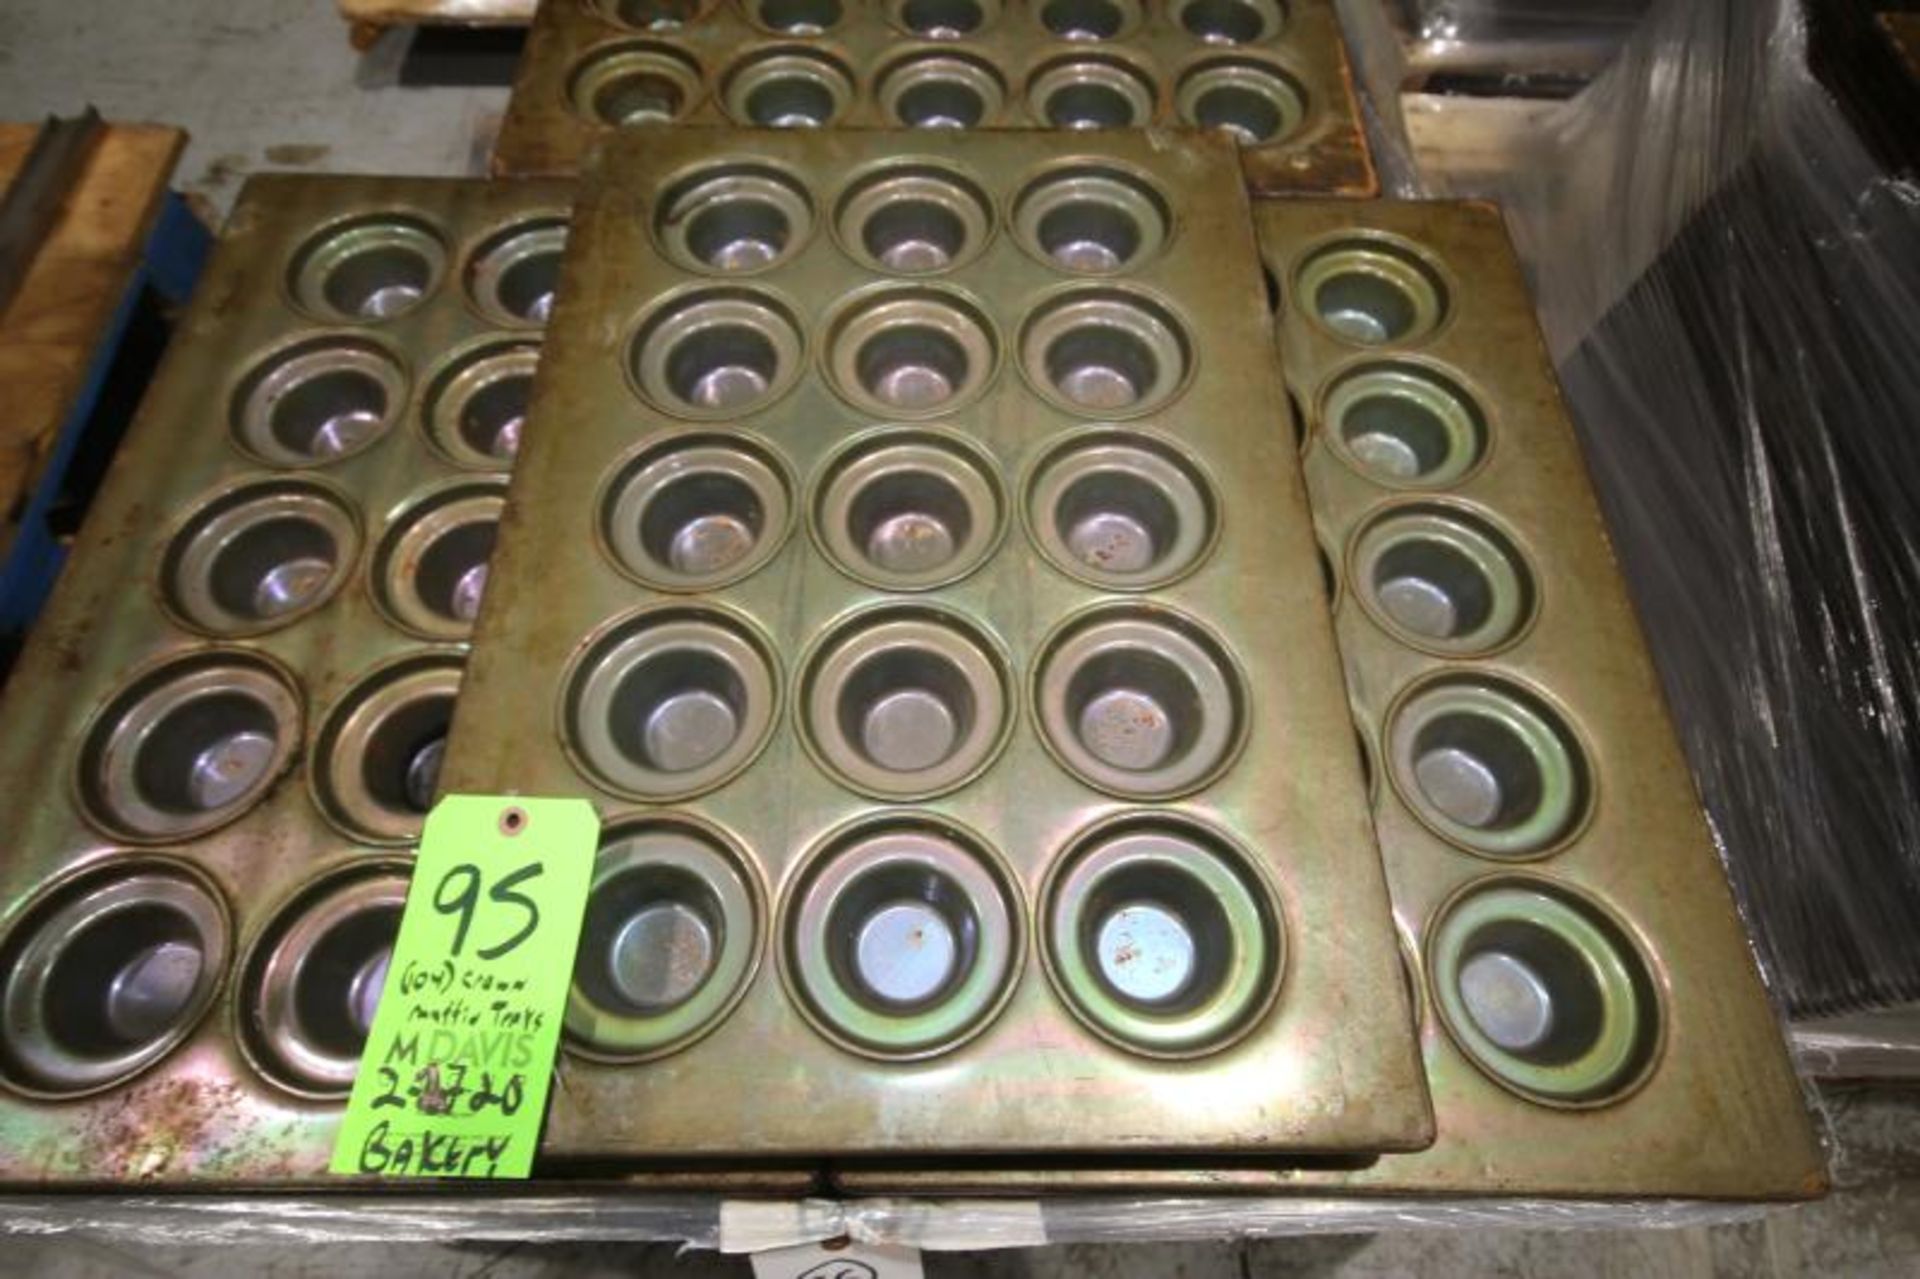 Crown Muffin Trays, Aprox. 4" x 15 Position, 18" W x 26" L (Located at the MDG Showroom